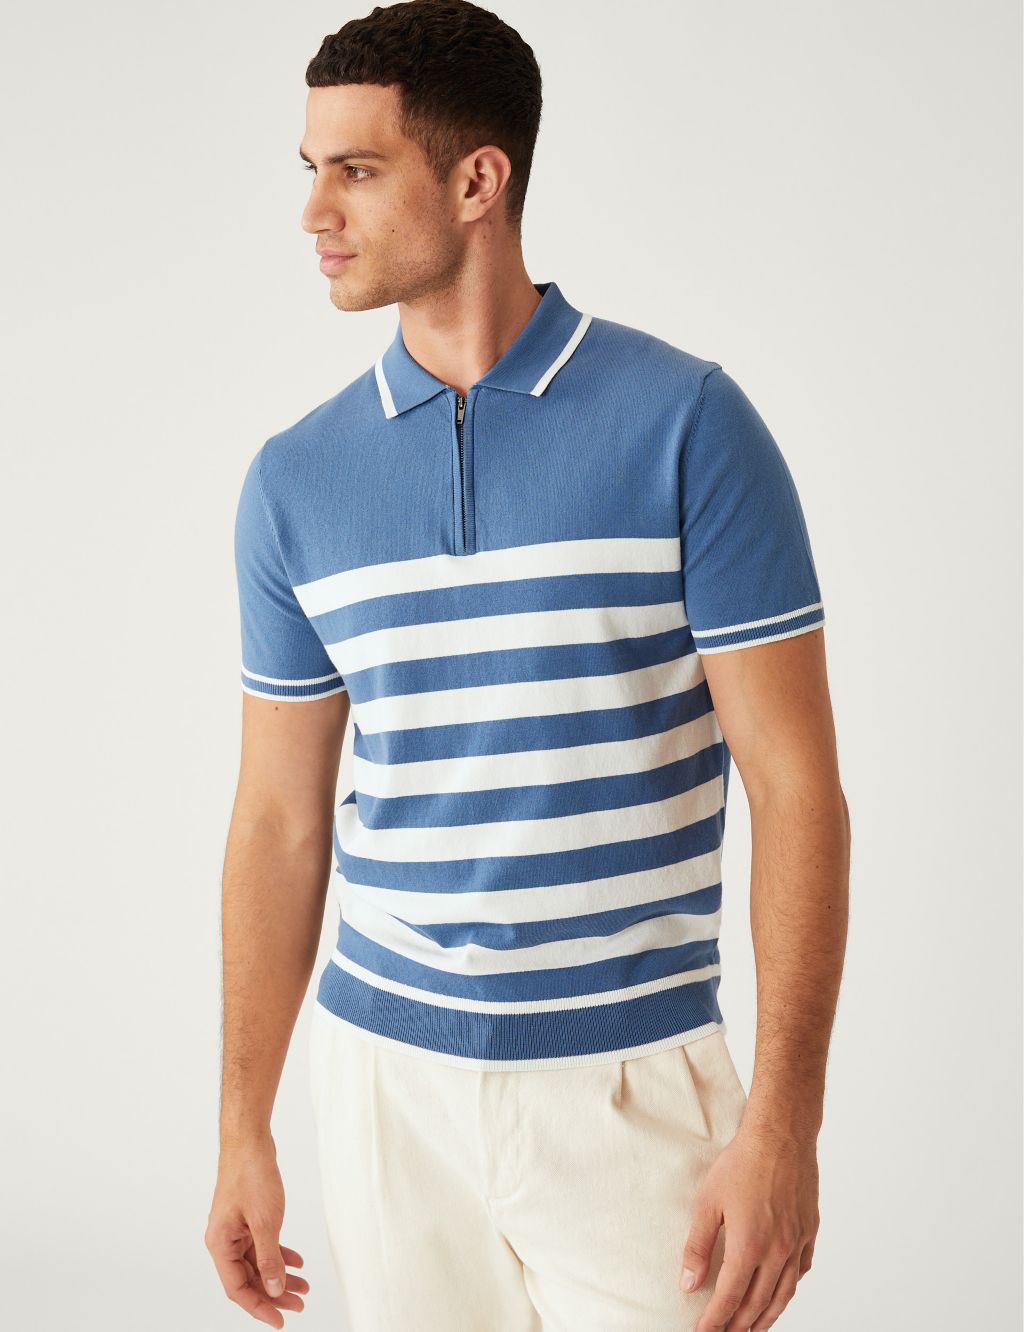 Cotton Rich Striped Knitted Polo Shirt image 1